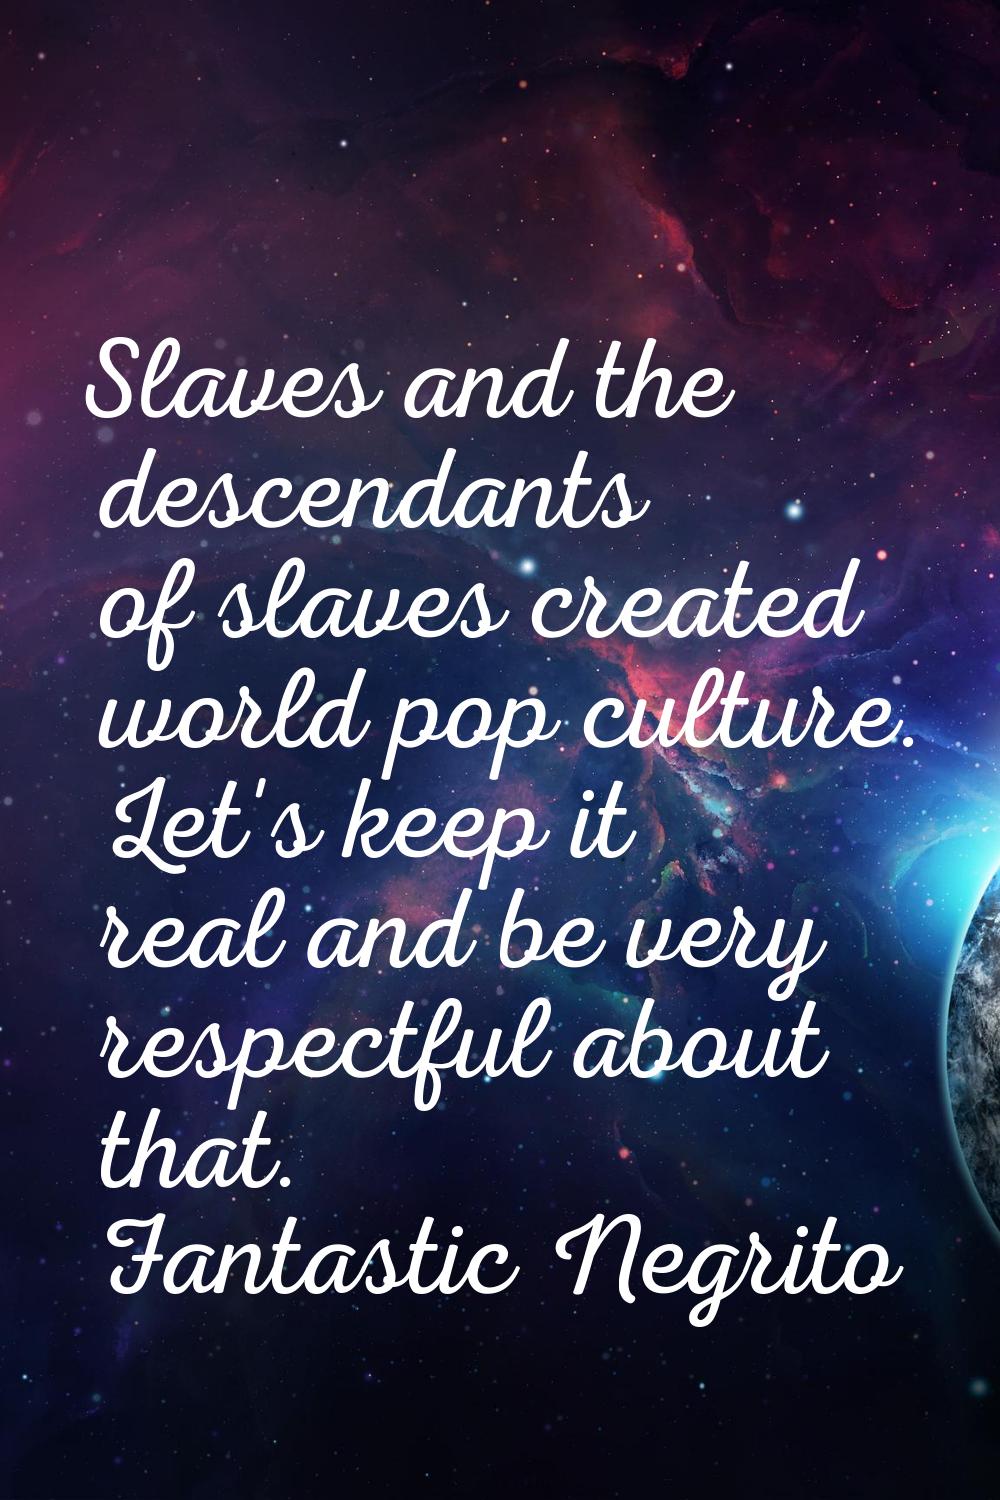 Slaves and the descendants of slaves created world pop culture. Let's keep it real and be very resp